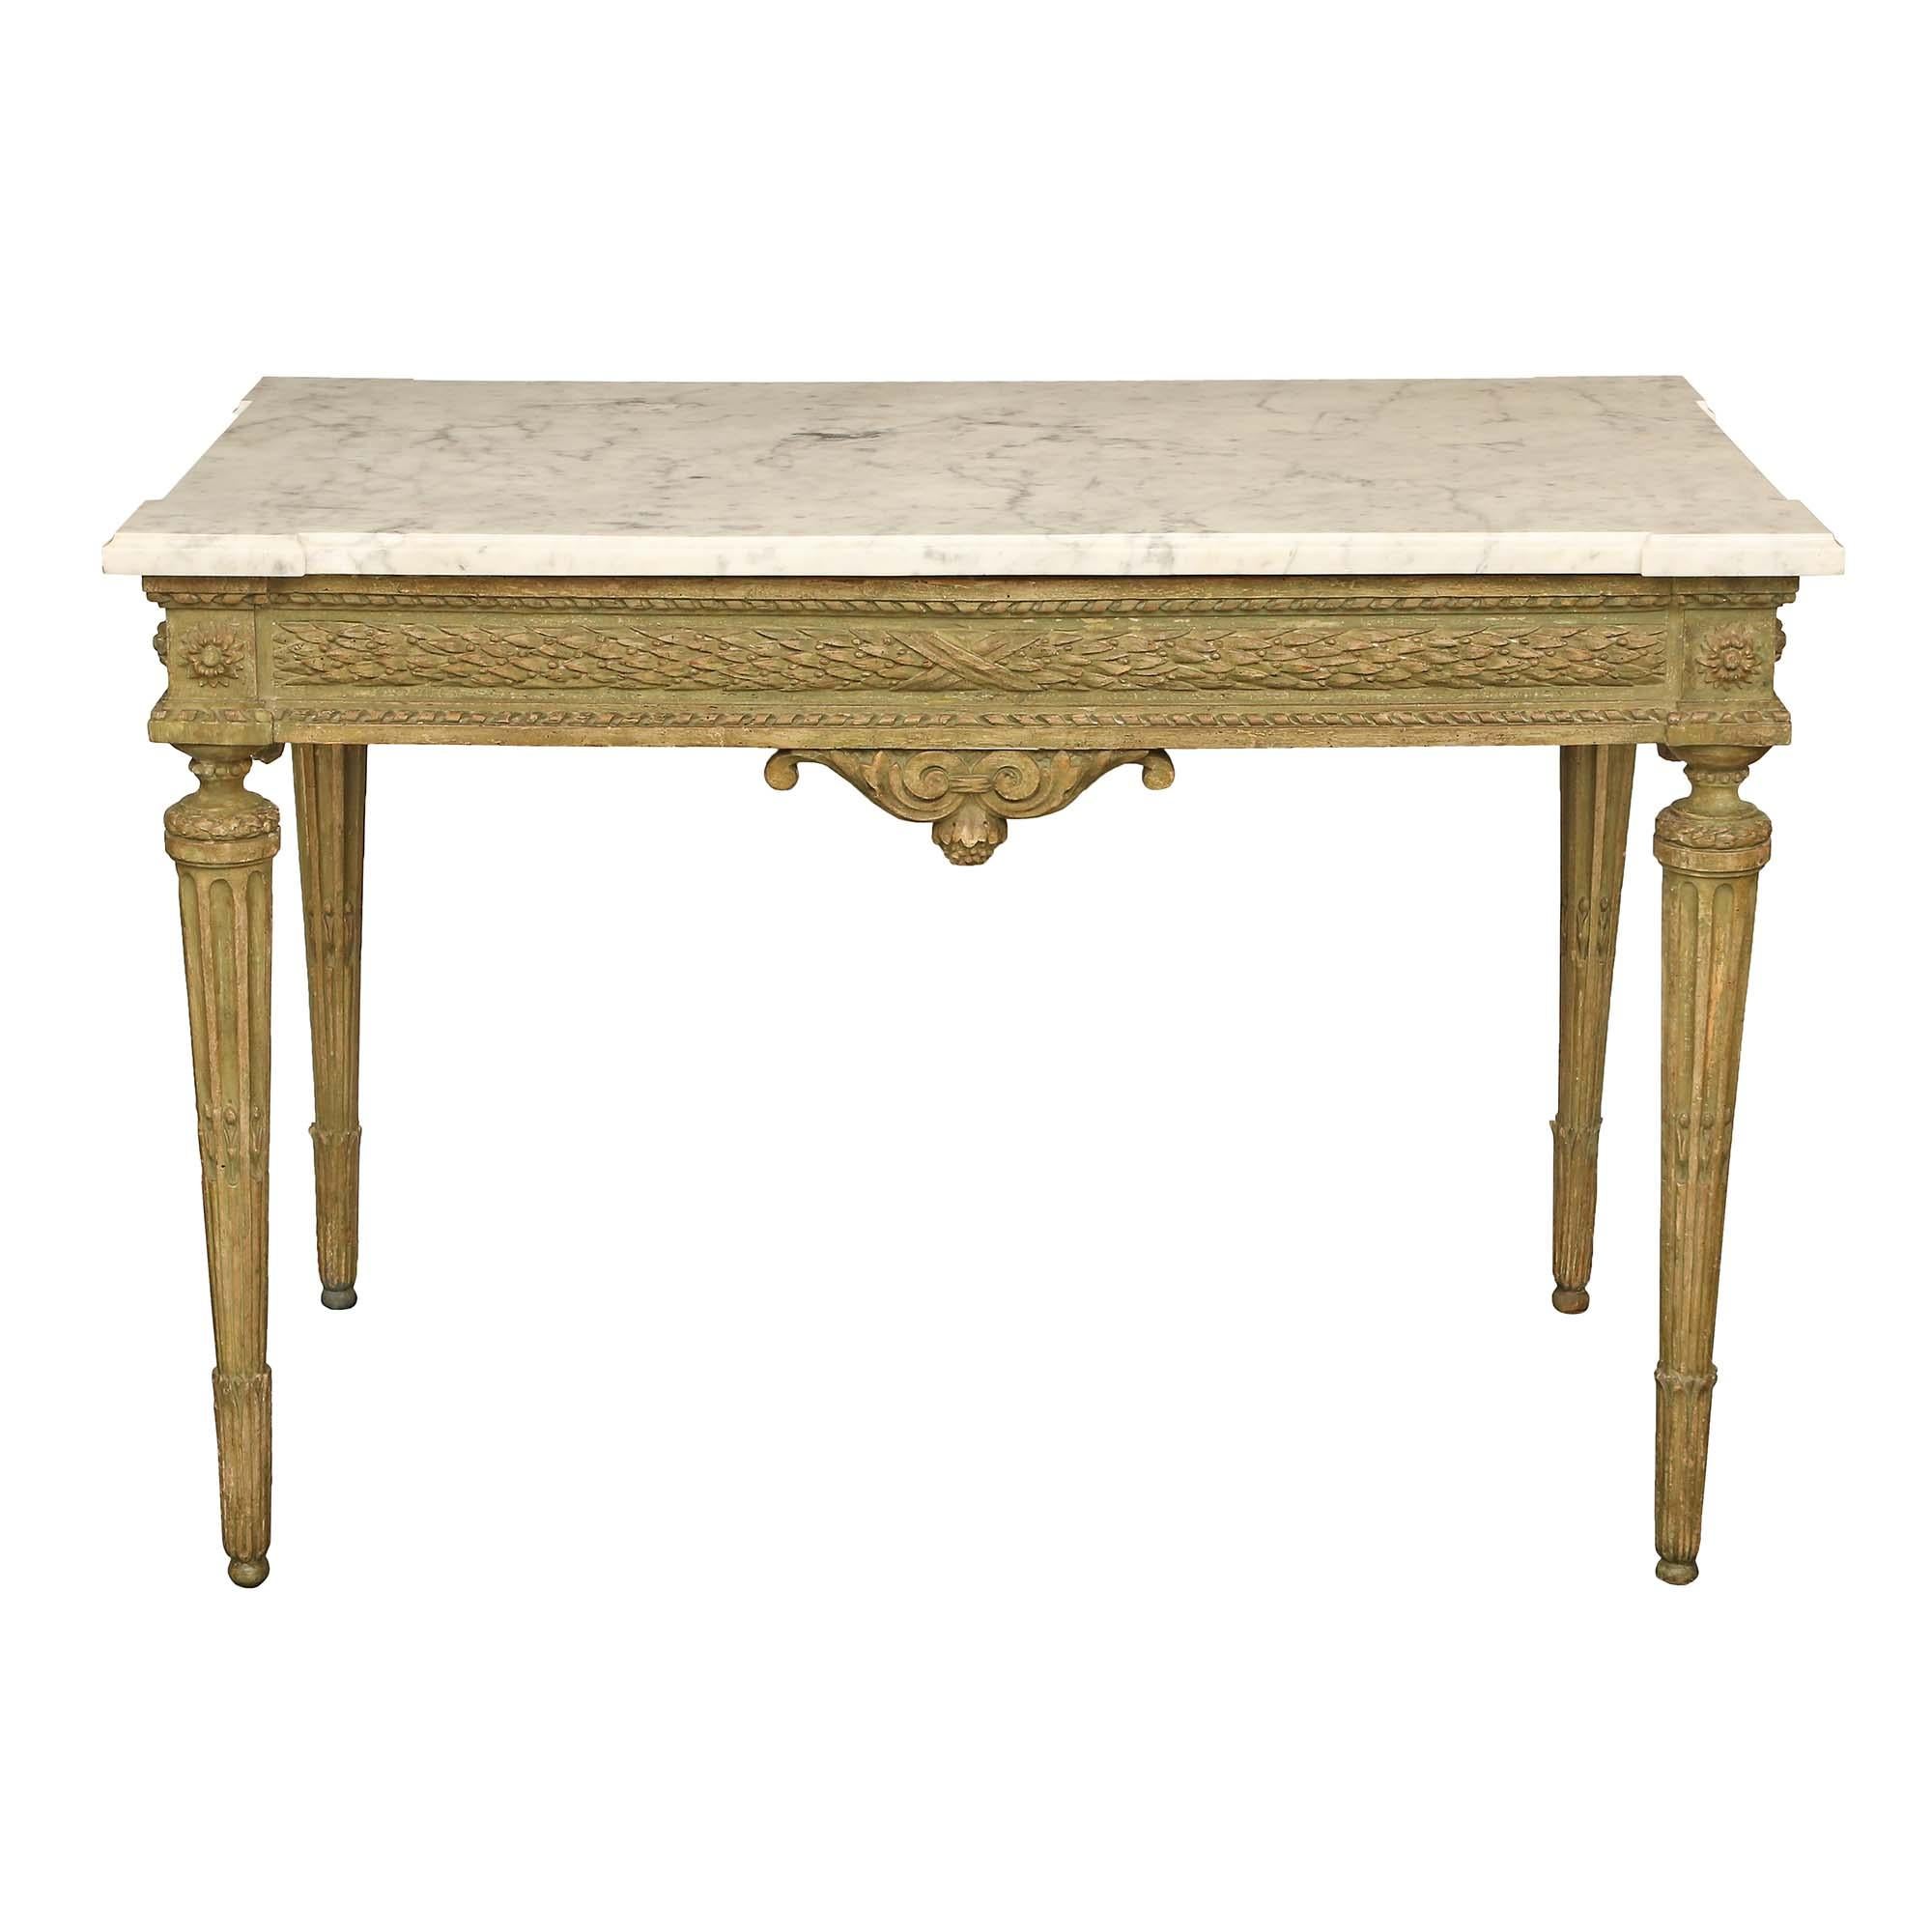 A lovely French 18th century Louis XVI period patinated center table with the original marble top. The table is raised by circular tapered fluted legs with foliate accents. The straight frieze is centered by a scrolled reserved and acorn finial